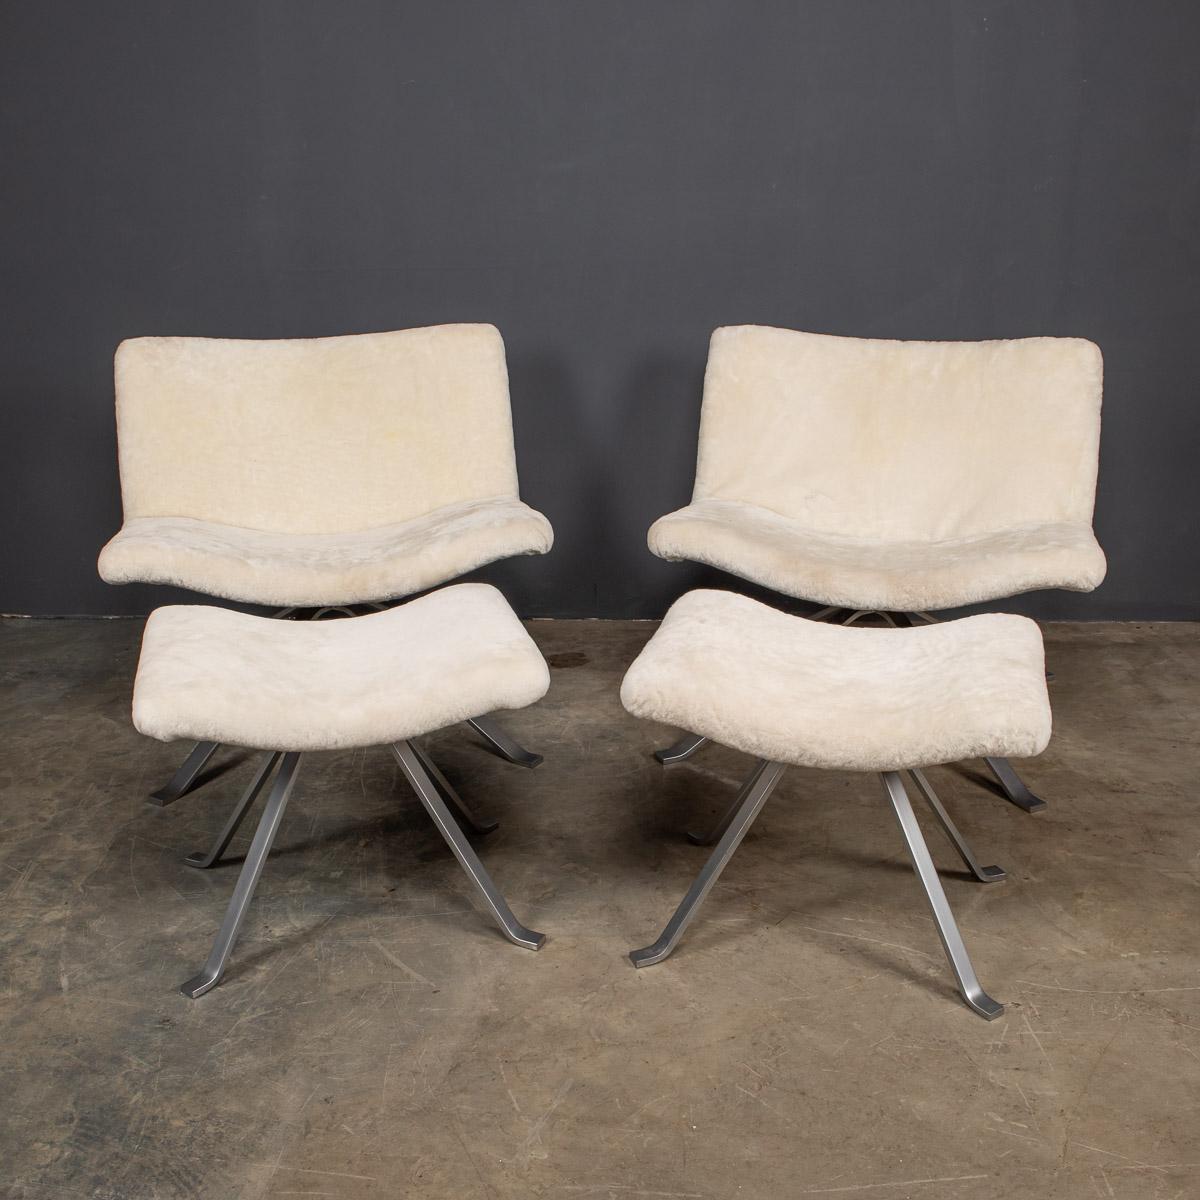 Elegant 20th century pair of swivel occasional chairs with foot rests and recently upholstered in natural shearling.

Condition

In good condition - reupholstered.

Size:

Height: 76cm
Depth: 72cm
Width: 83m.